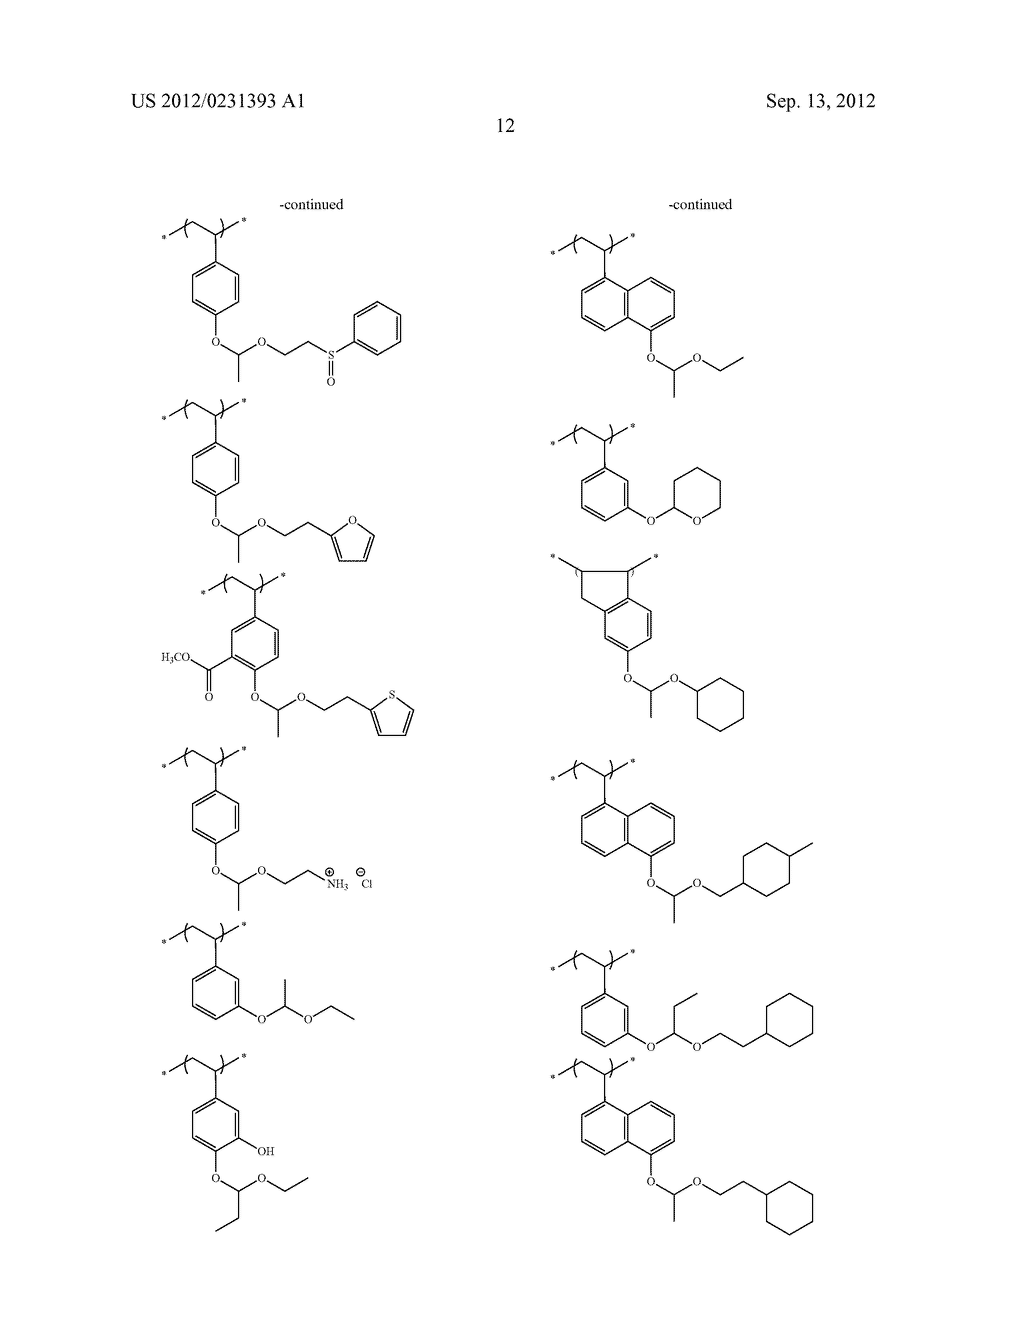 ACTINIC-RAY- OR RADIATION-SENSITIVE RESIN COMPOSITION AND METHOD OF     FORMING A PATTERN USING THE SAME - diagram, schematic, and image 13